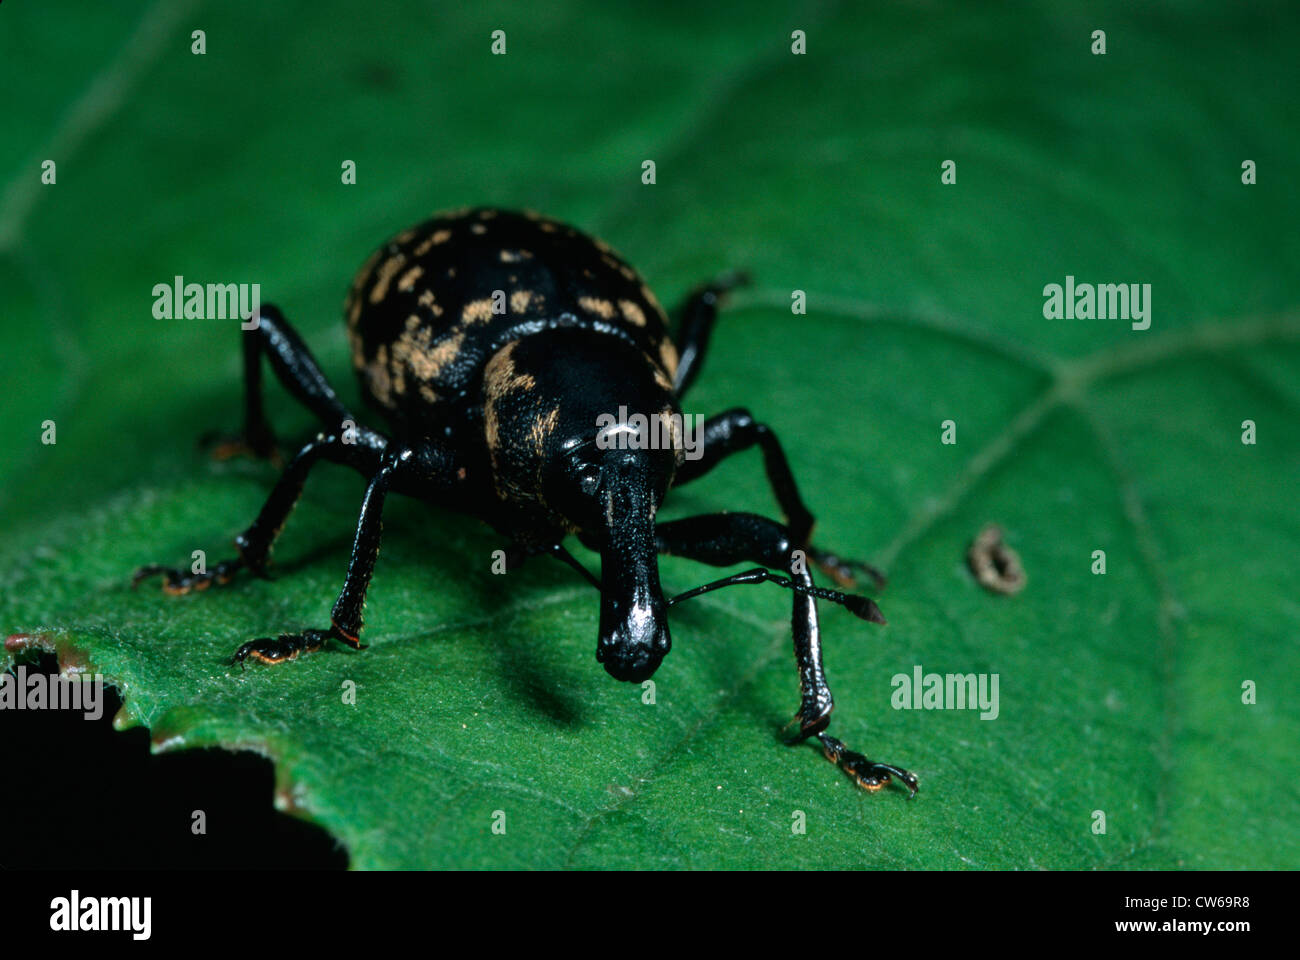 Liparus glabrirostris (Liparus glabrirostris), sitting on a leaf Stock Photo